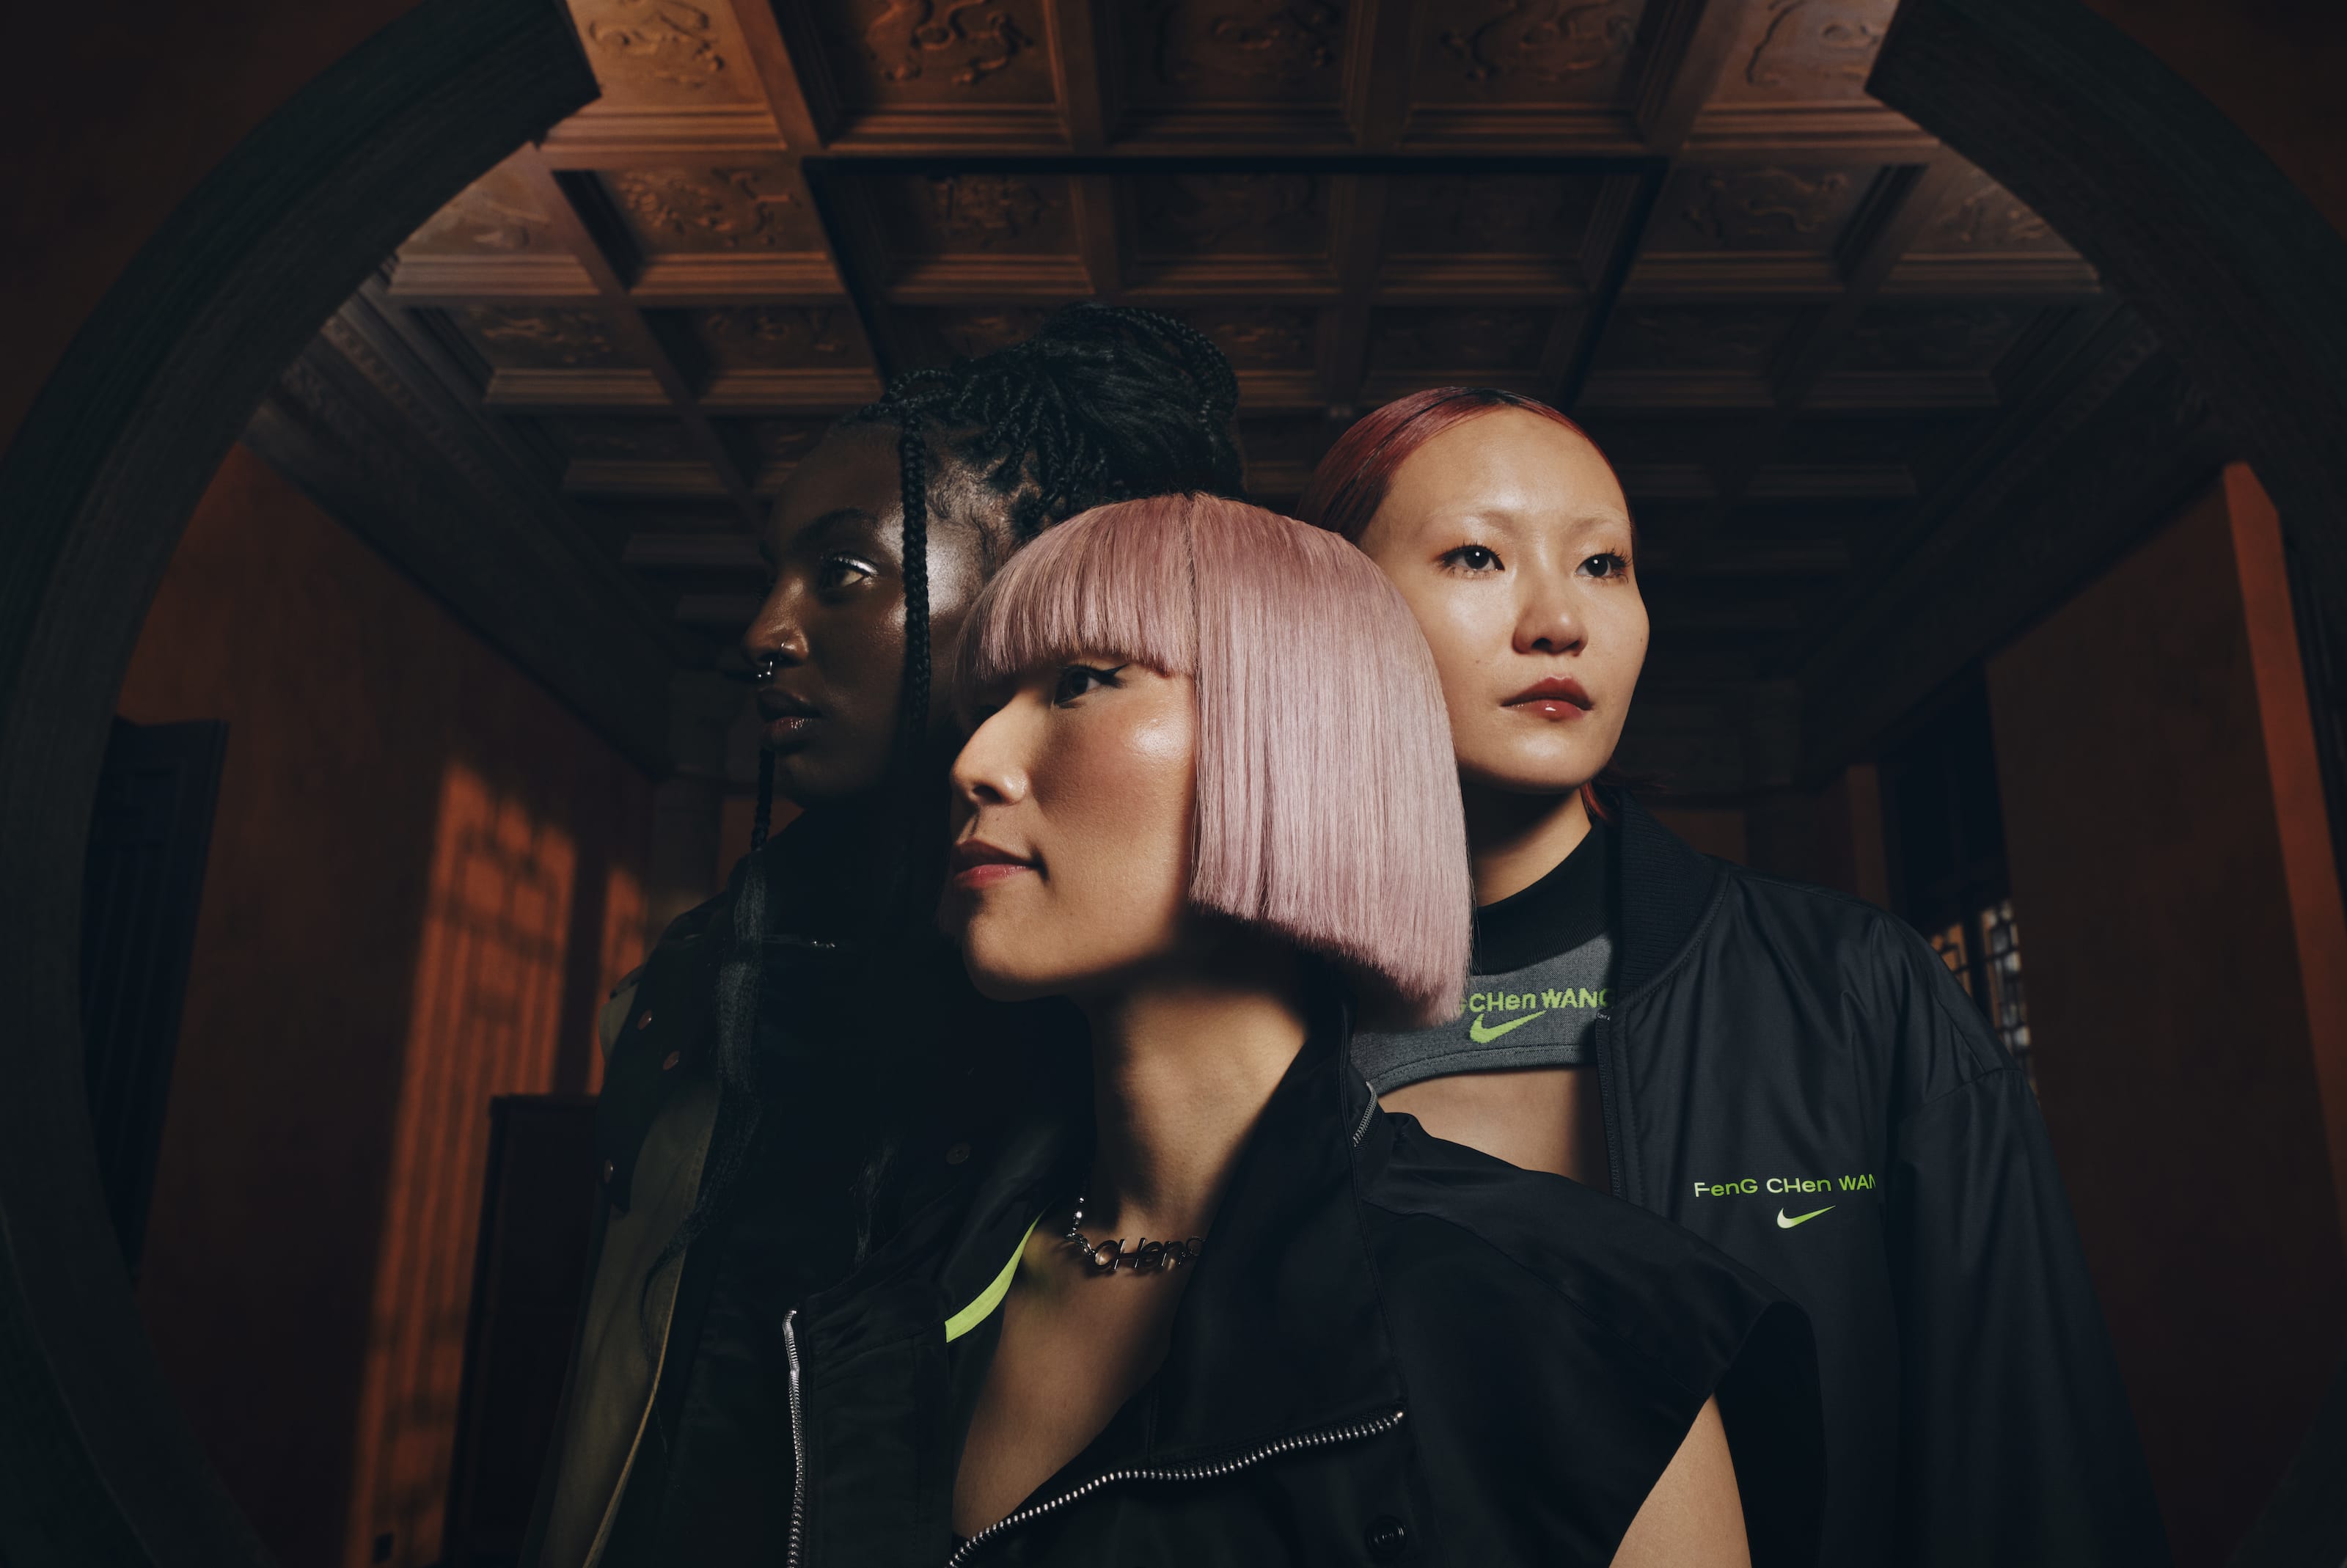 Nike x Feng Chen Wang Collection Official Images - NIKE, Inc.